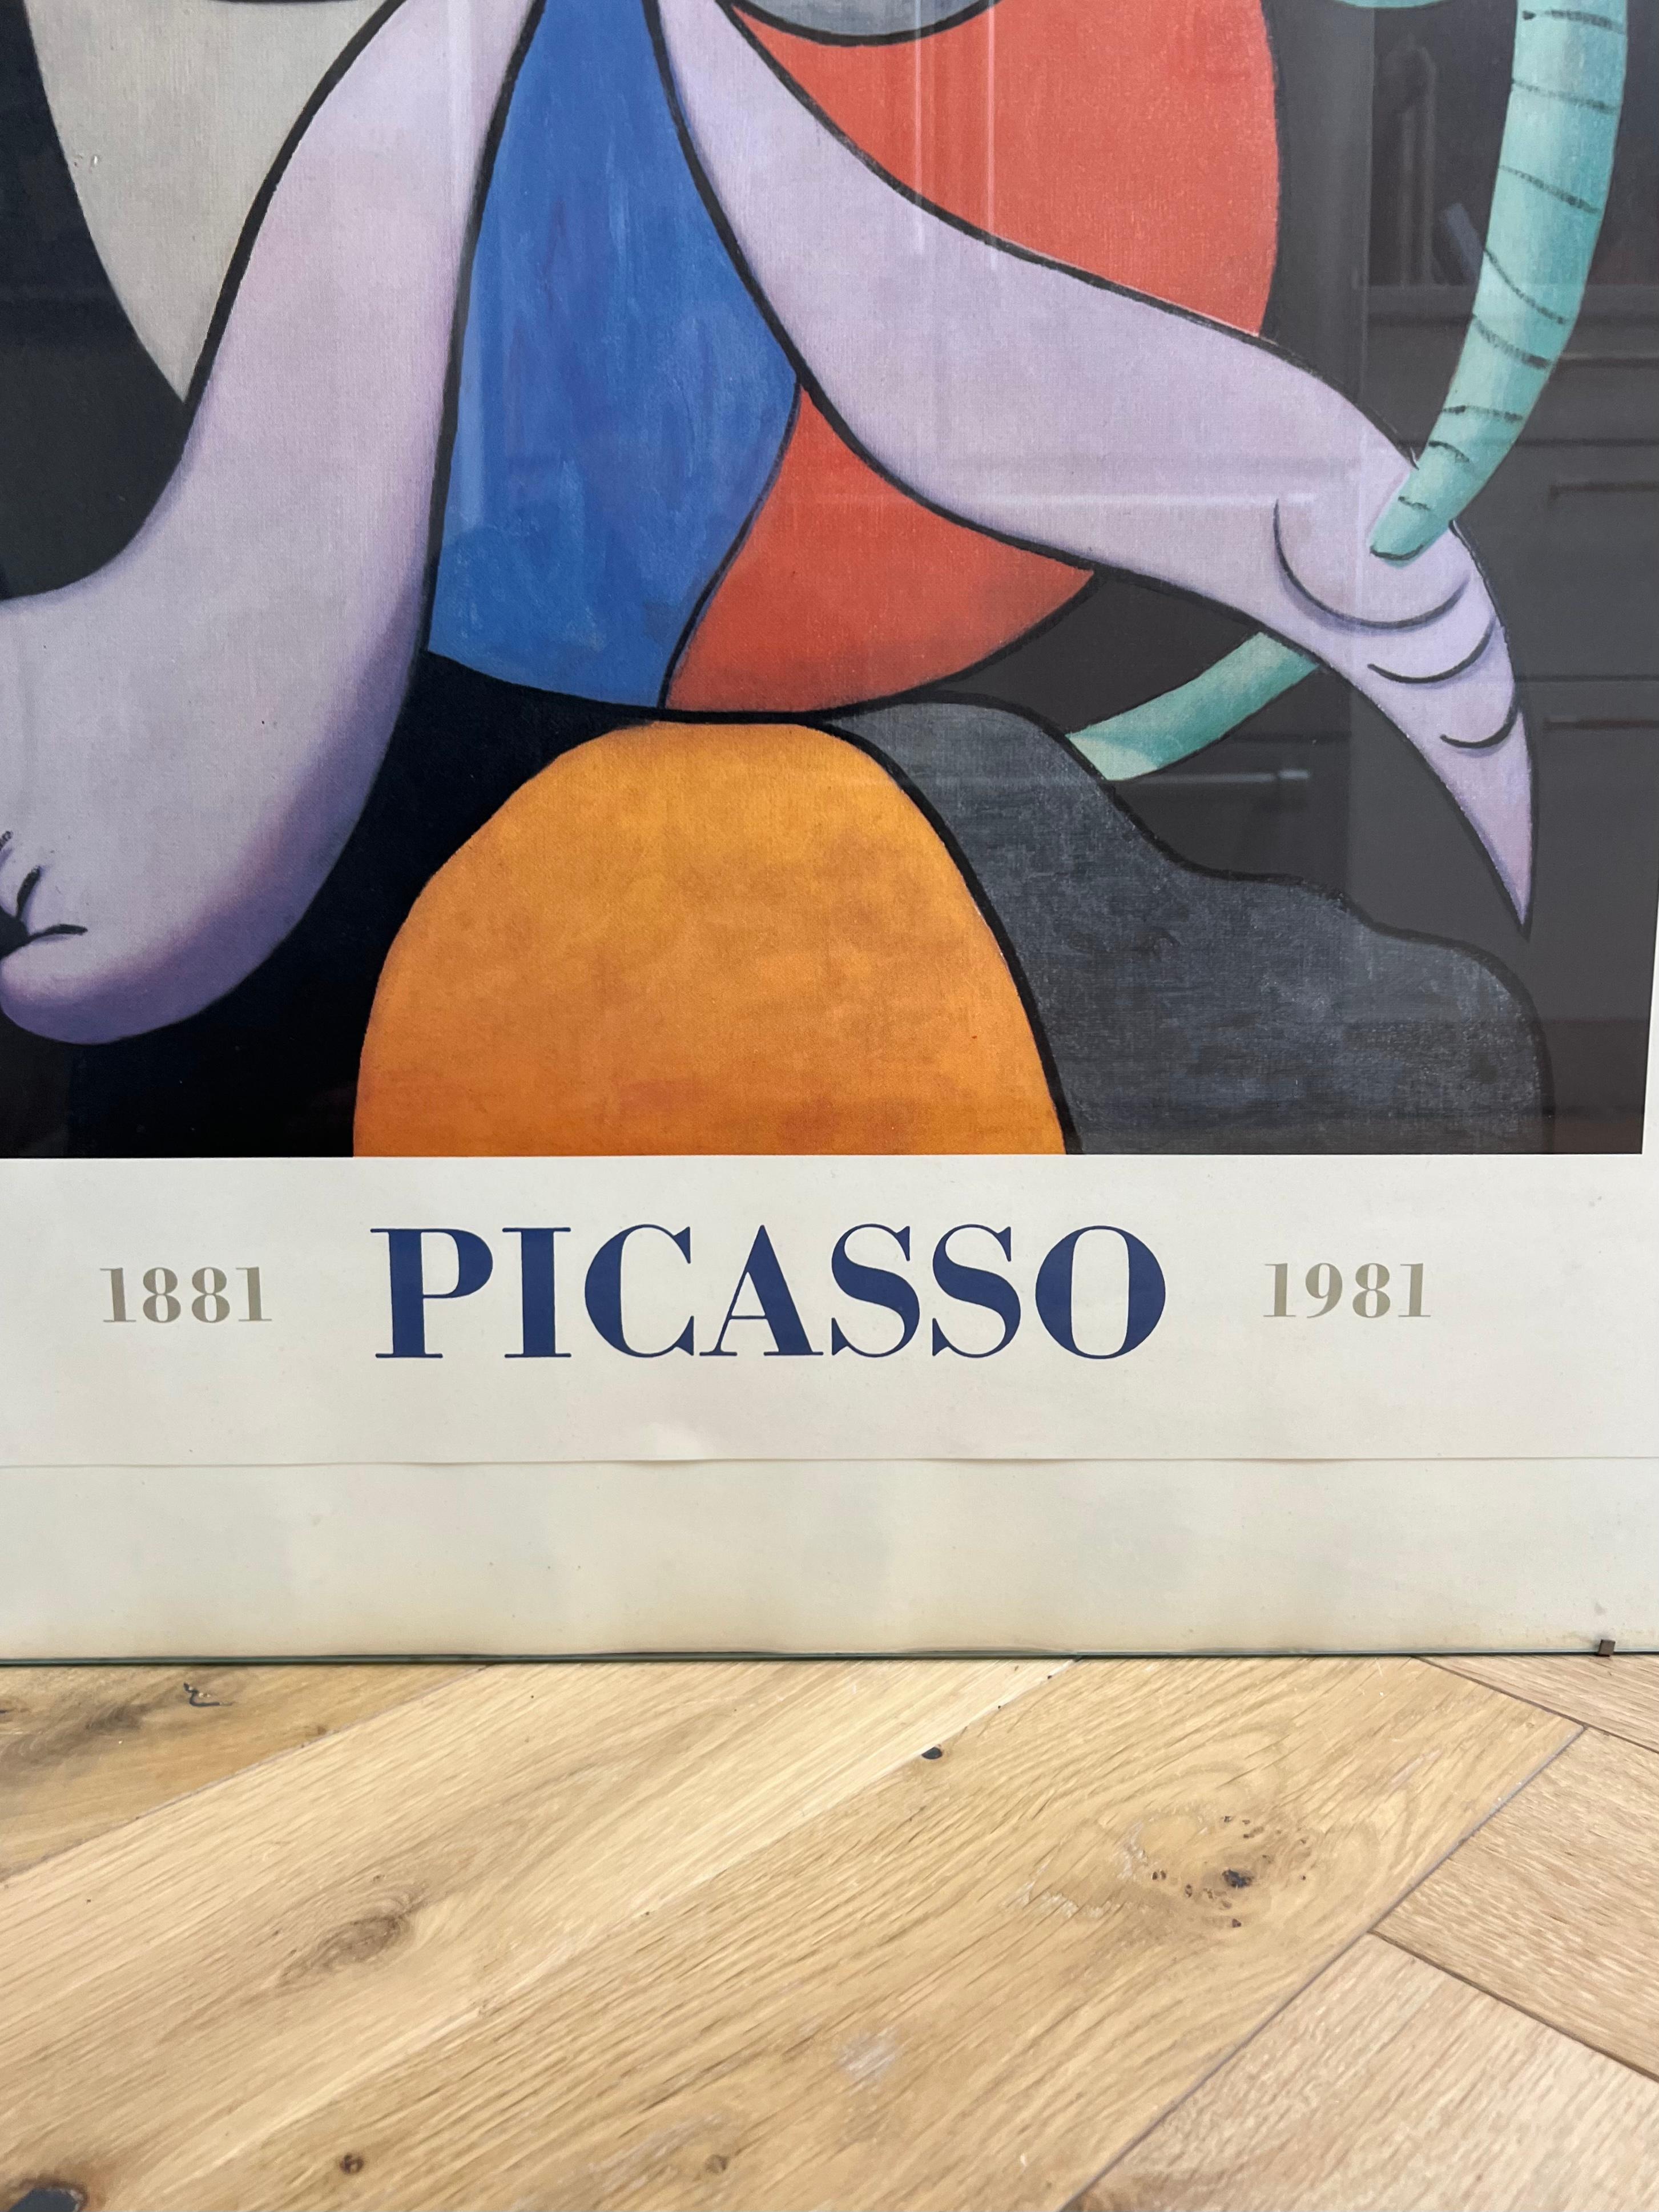 Large Vintage Picasso Exhibition Poster, beind glass, Basel 1981 For Sale 2